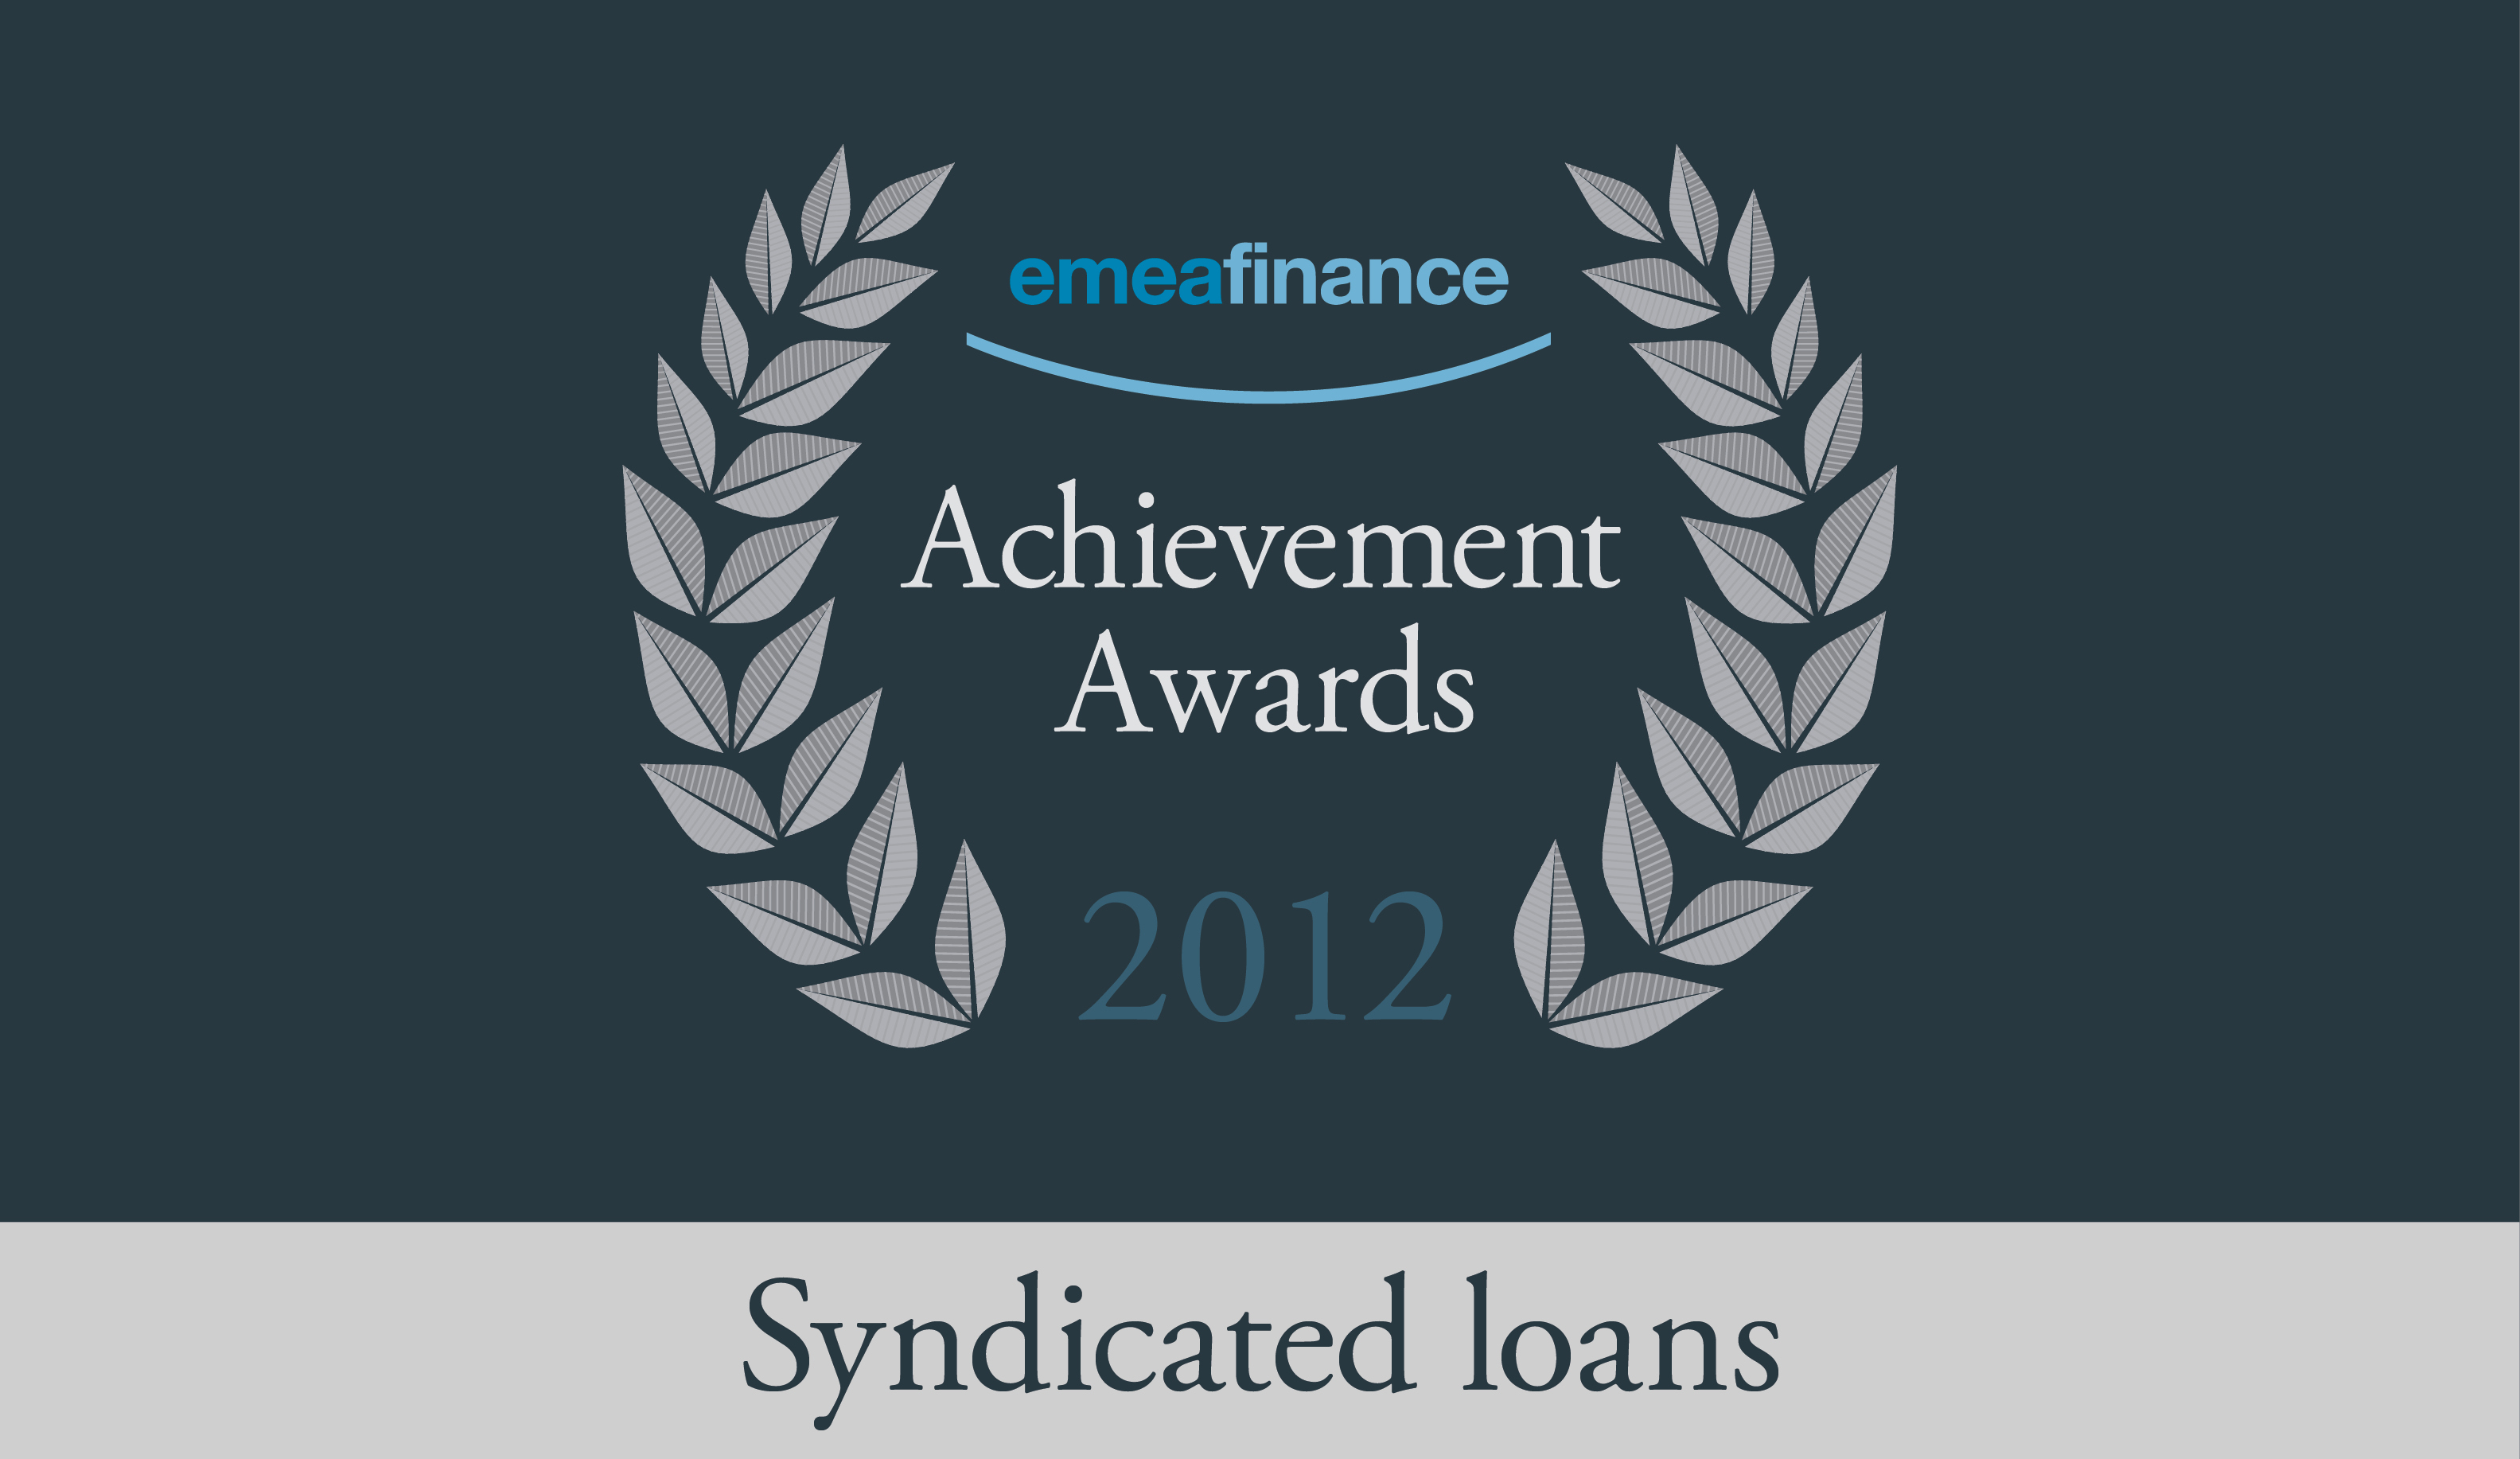 Achievement Awards 2012: Syndicated loans